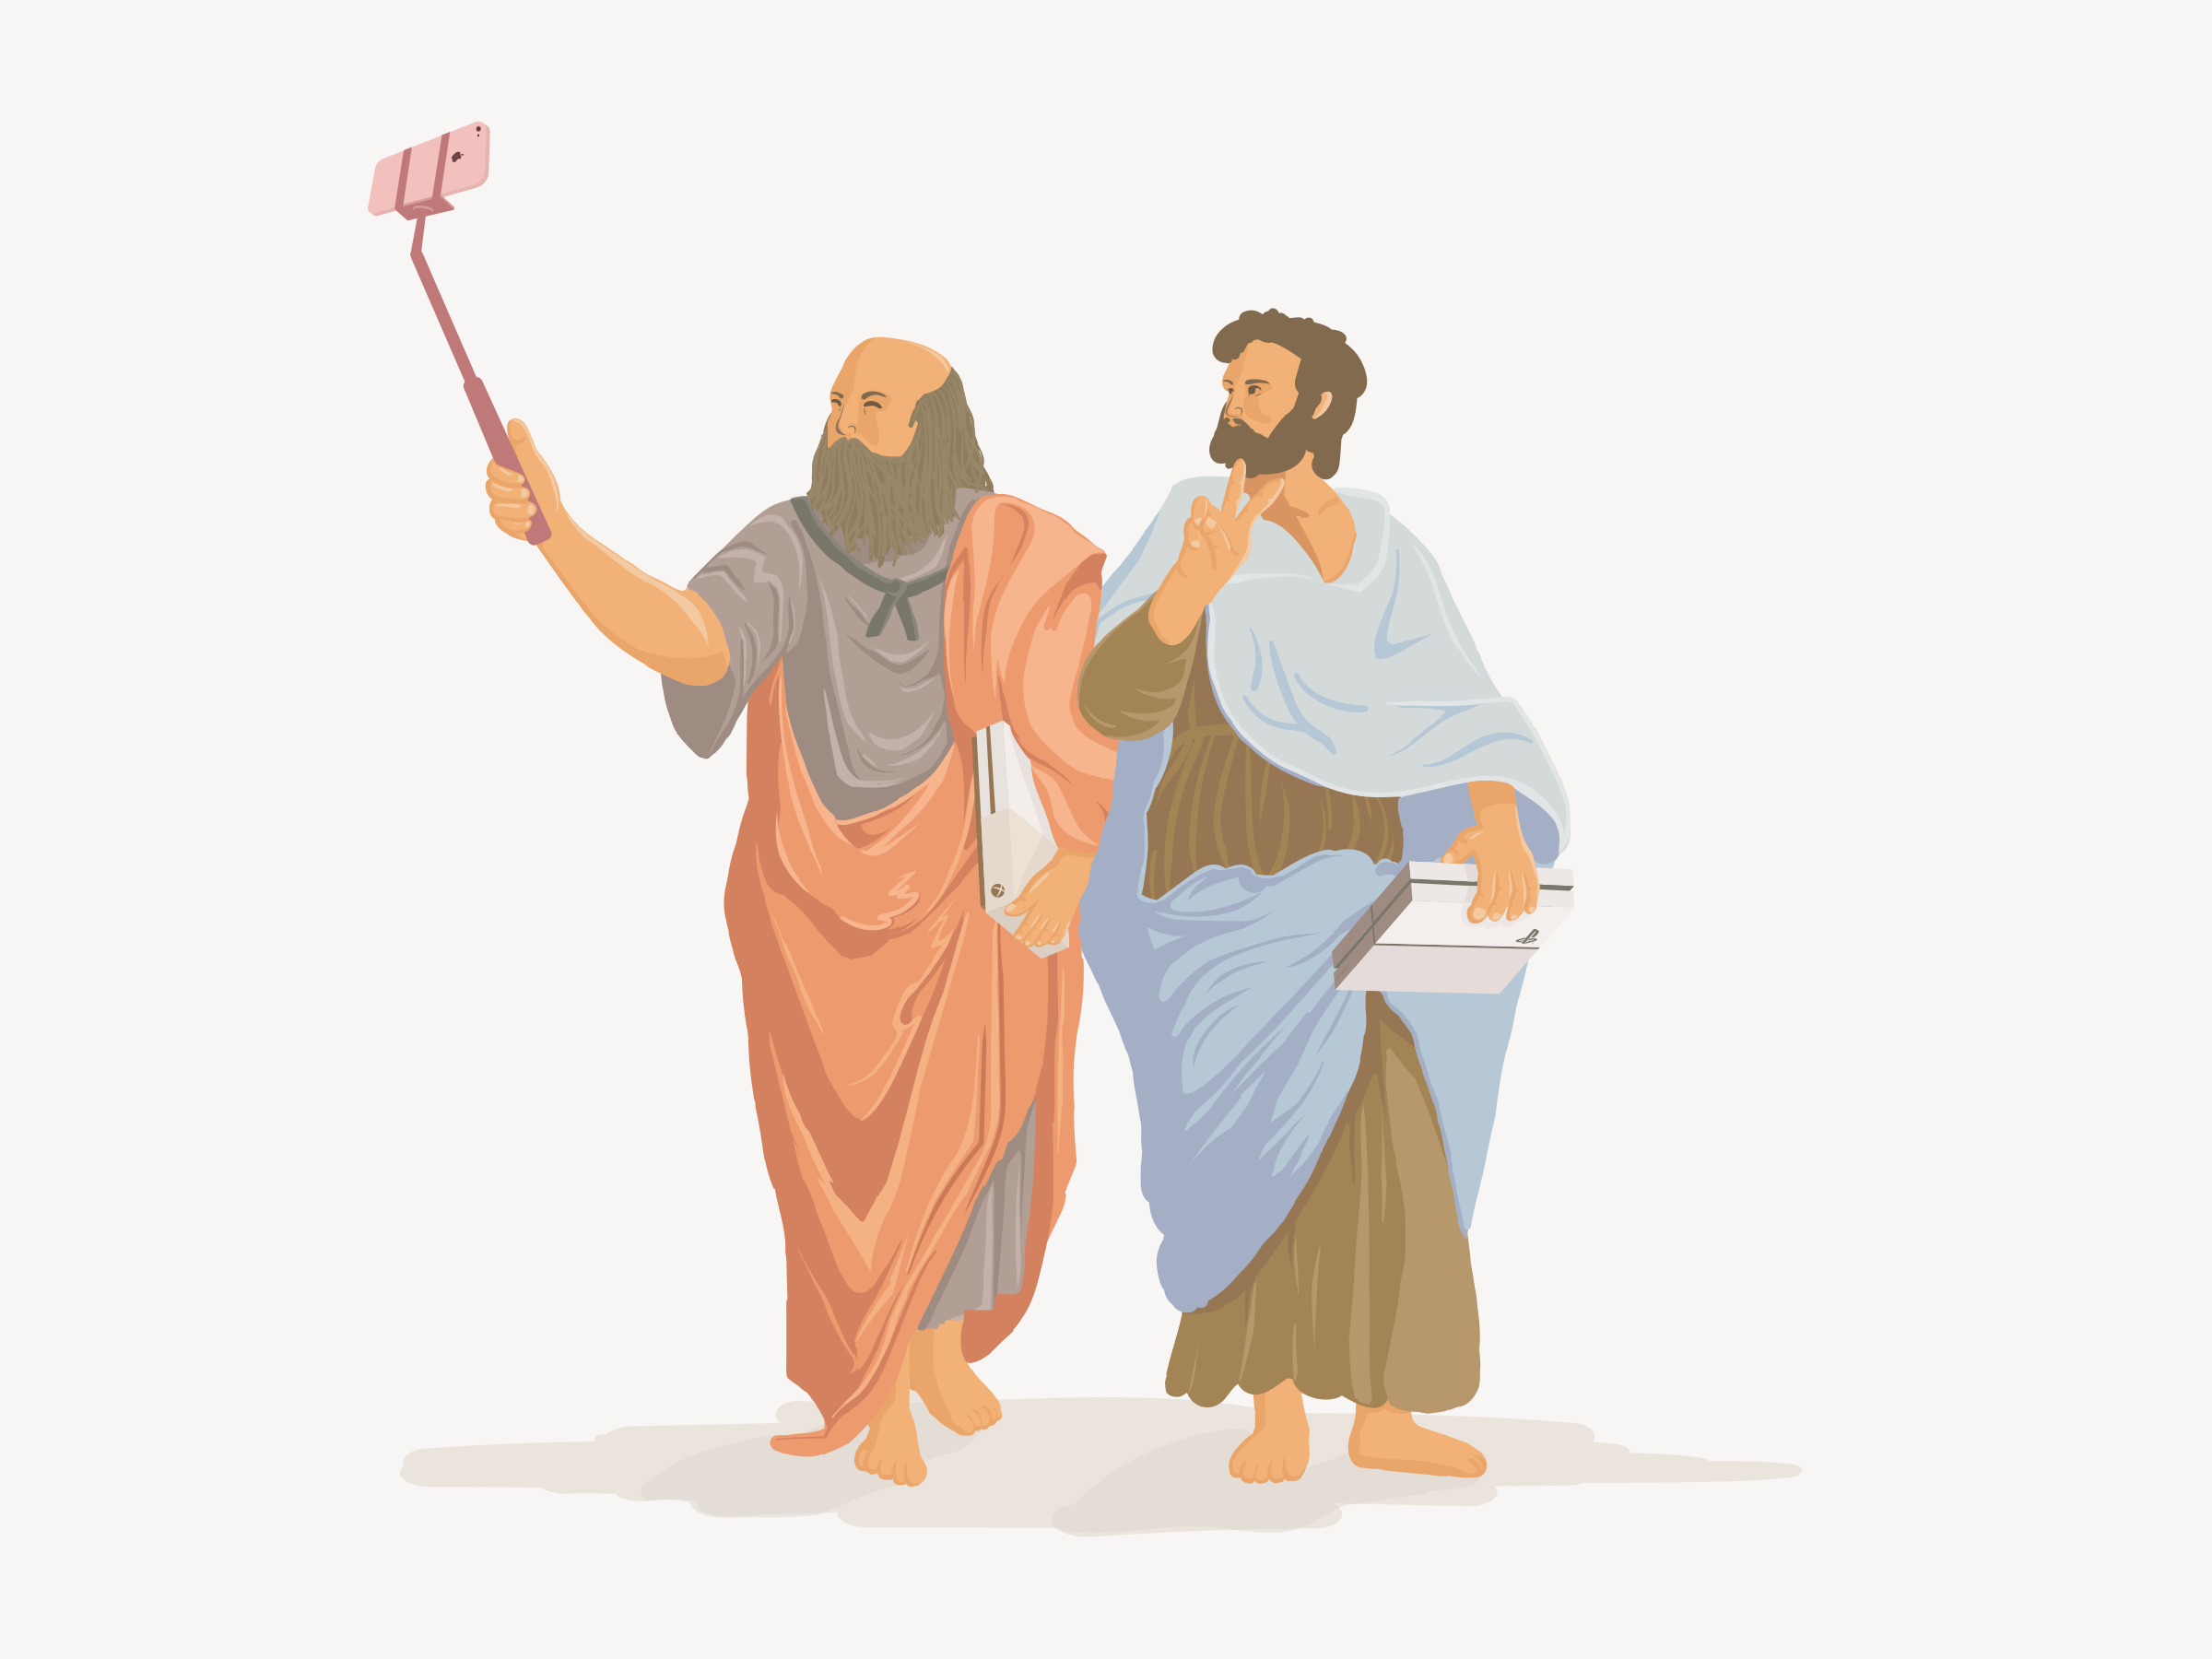 plato and aristotle by kien hoang on dribbble plato and aristotle by kien hoang on